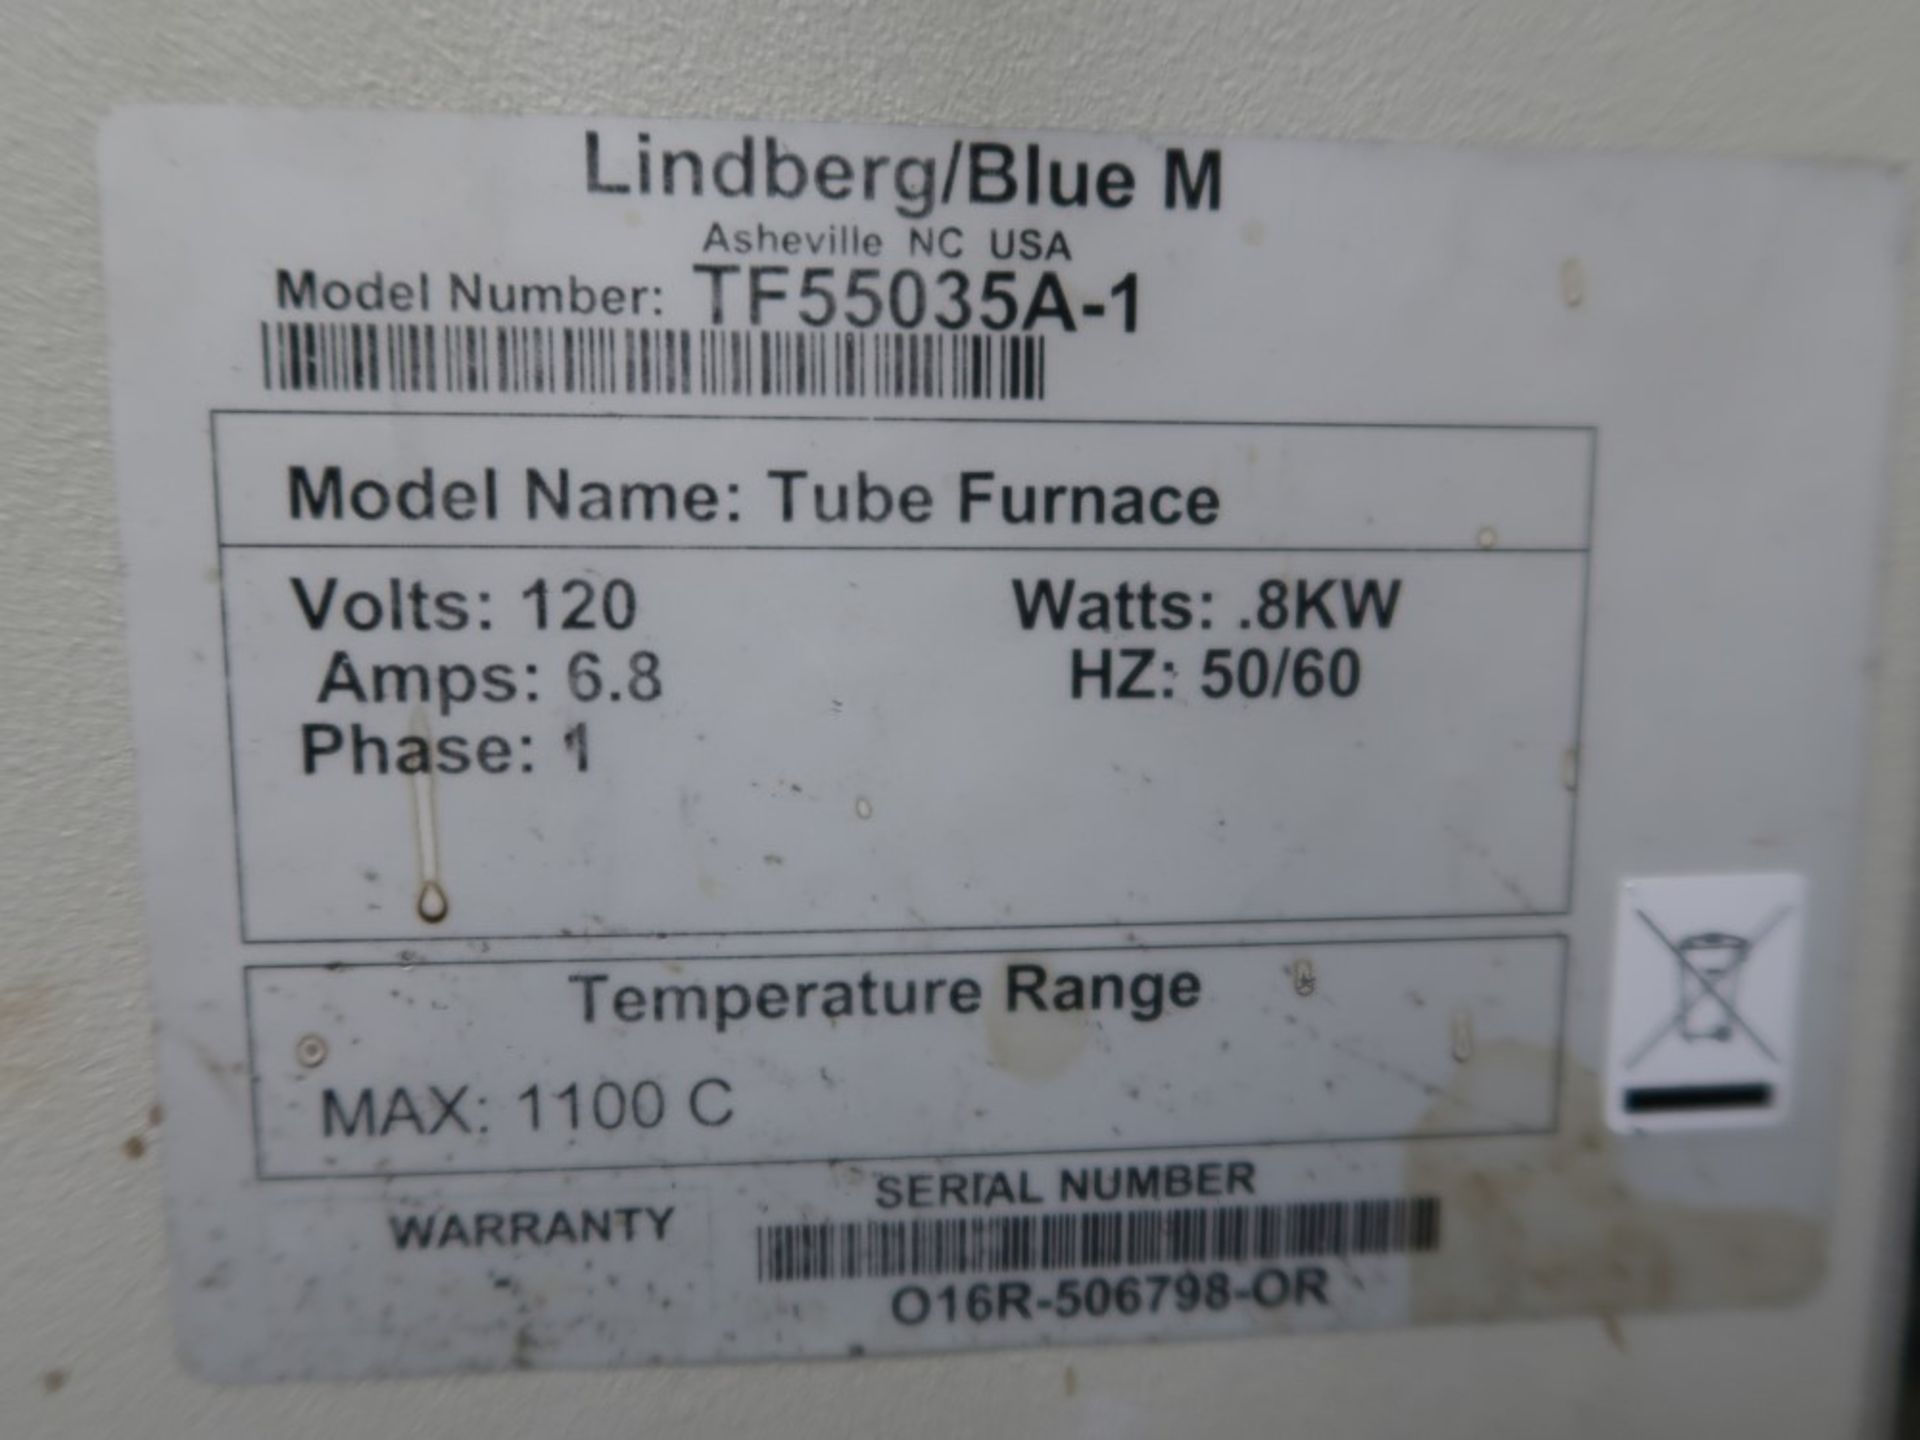 Lindberg/Blue M Electric Tube Furnace Model TF55035A-1, S/N 016R-506798-OR, Max Temp 1100 Degrees C - Image 4 of 4